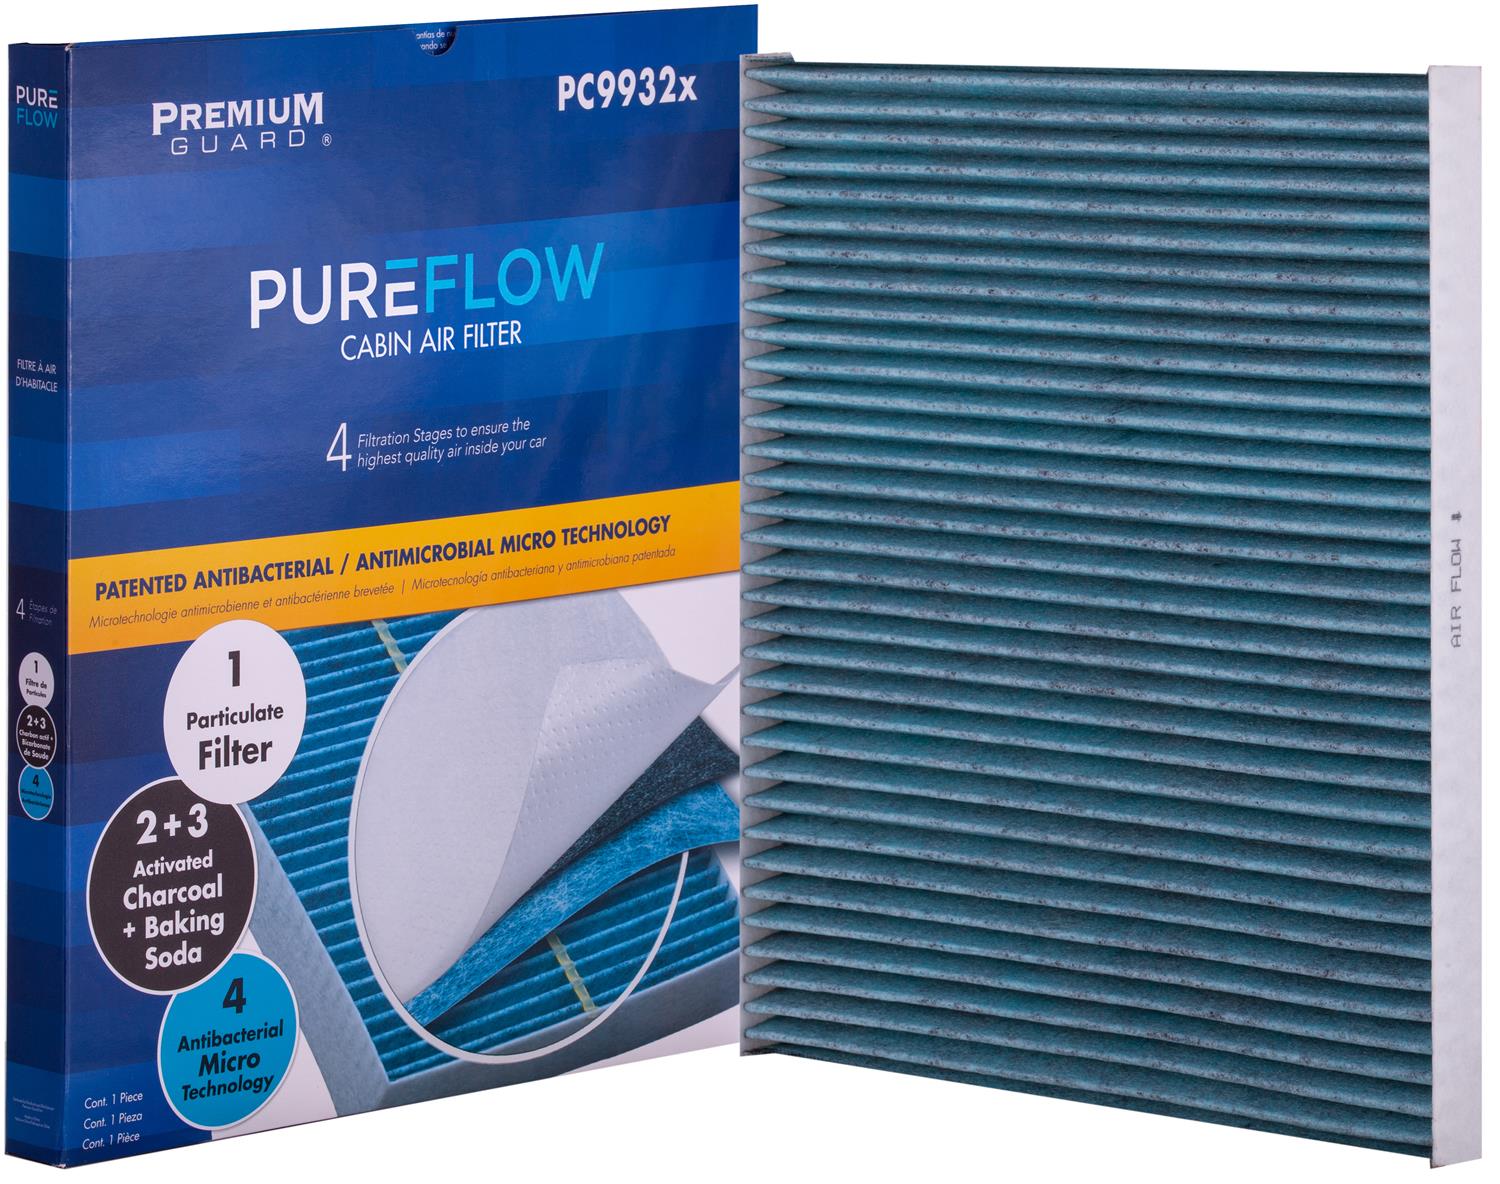 PUREFLOW 2016 Nissan Maxima Cabin Air Filter with Antibacterial Technology, PC9932X